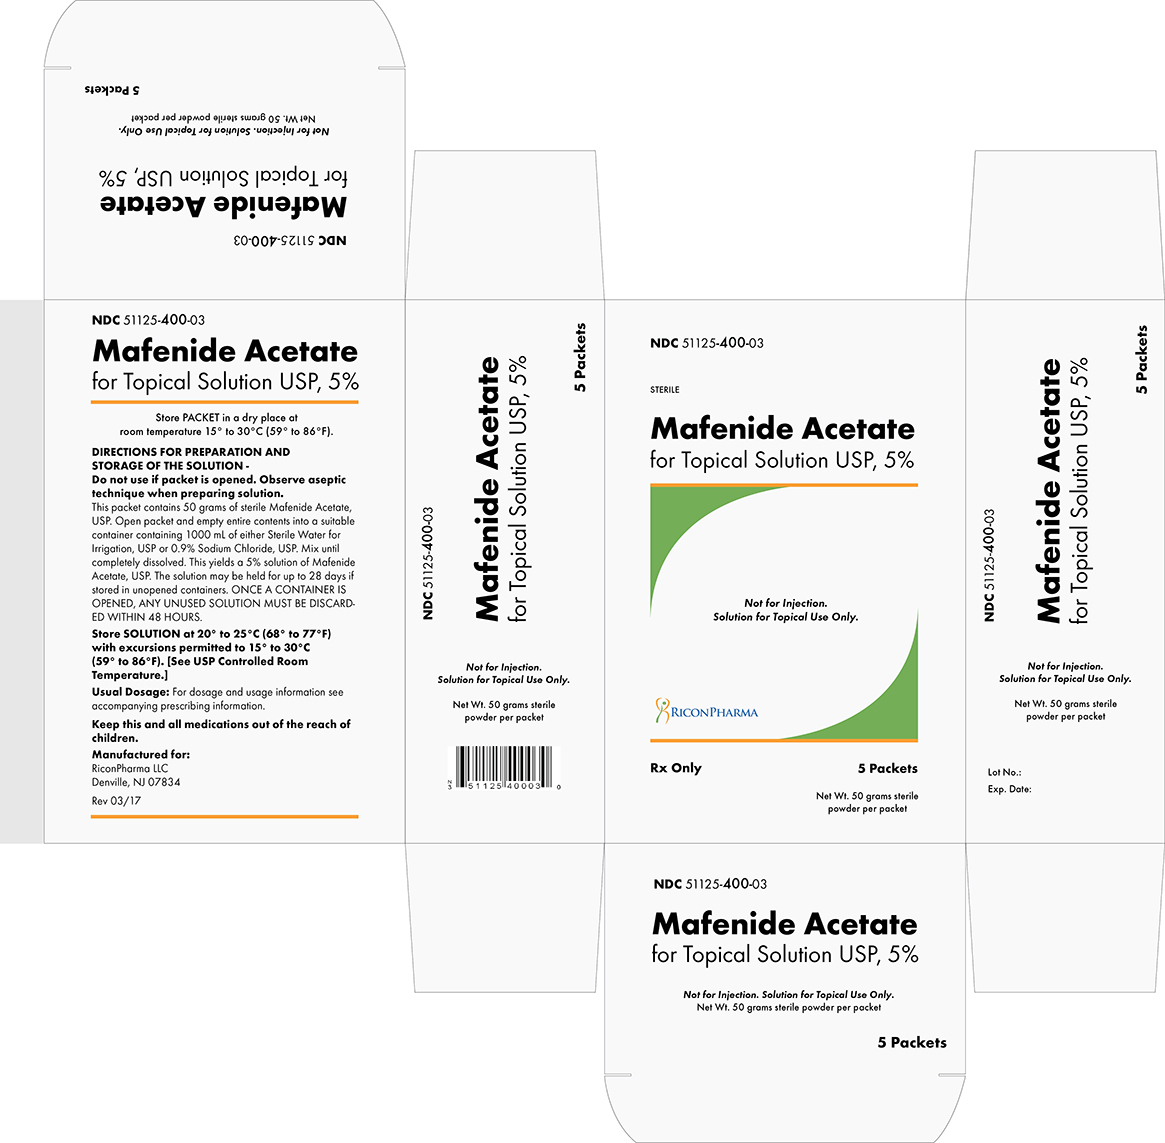 Mafenide Acetate for Topical Solution, USP - Carton Label